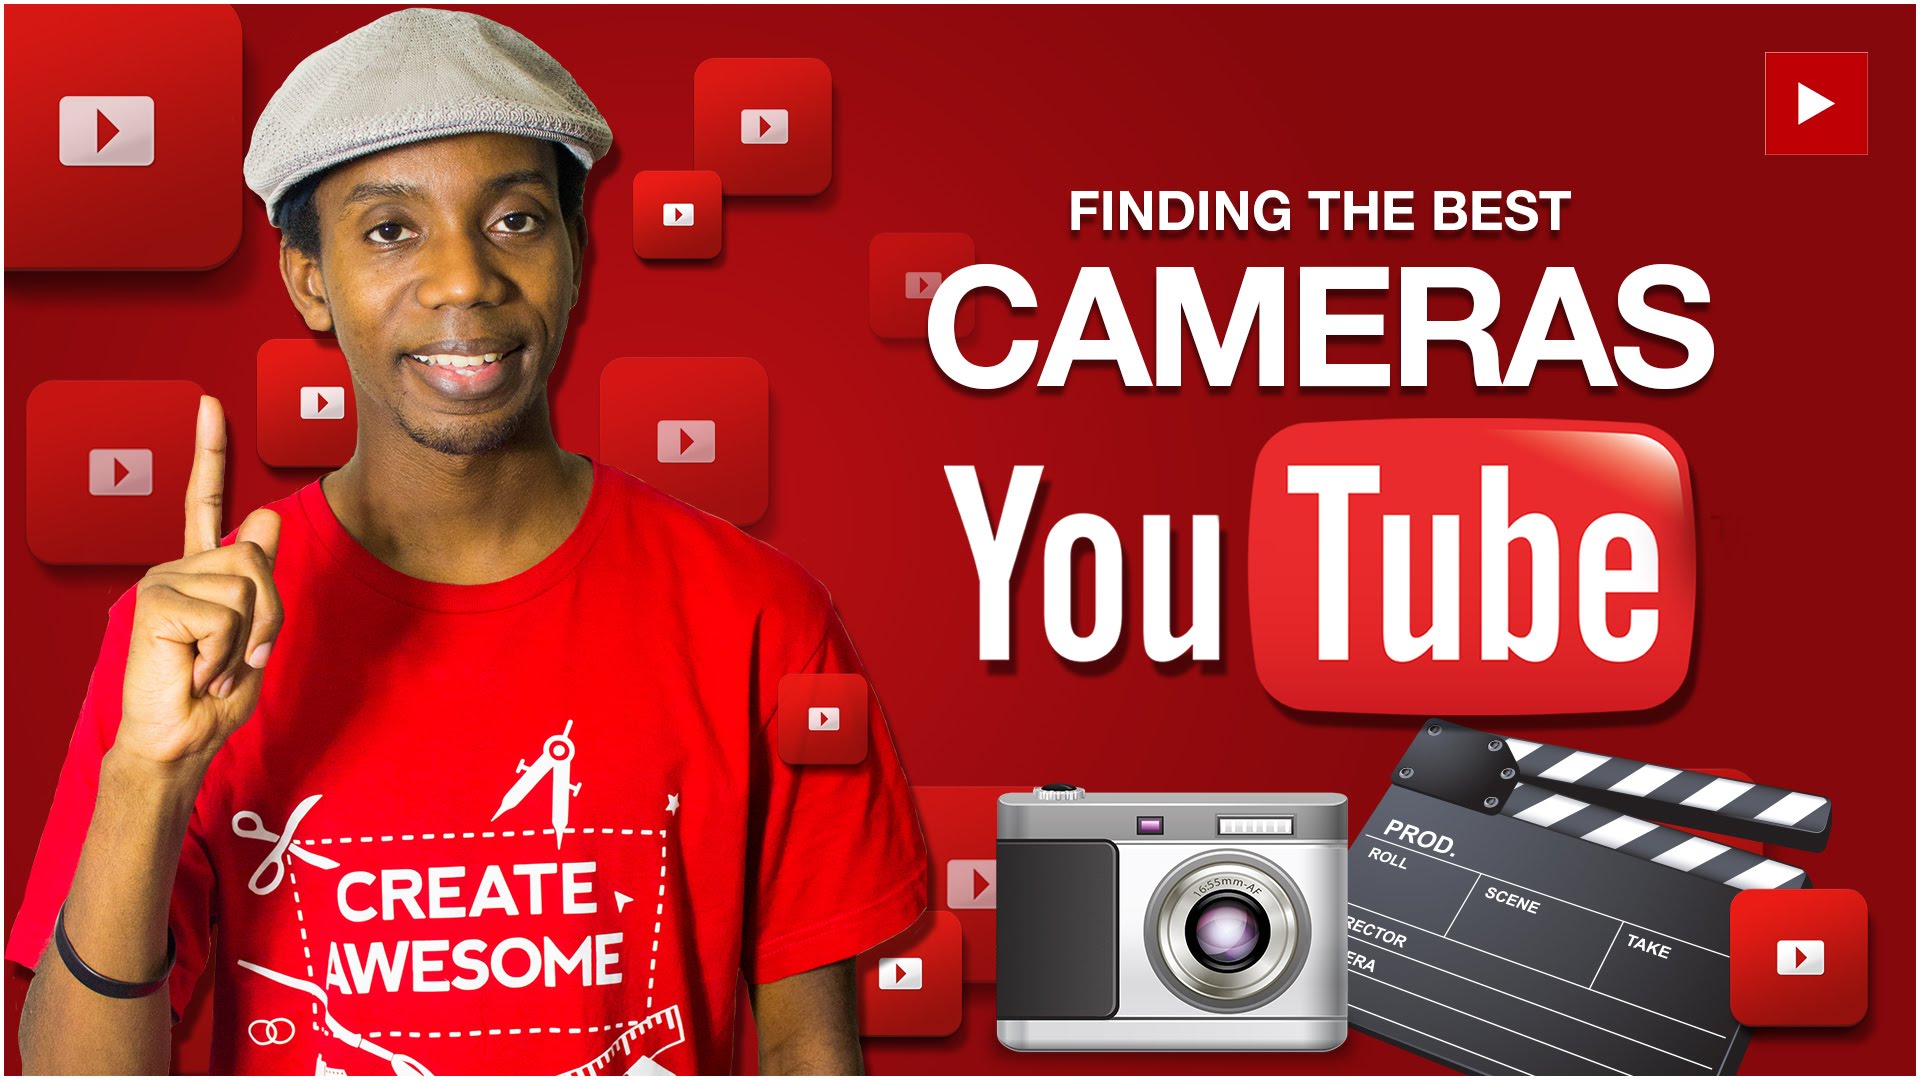 Best Cameras for Making YouTube Videos 2015